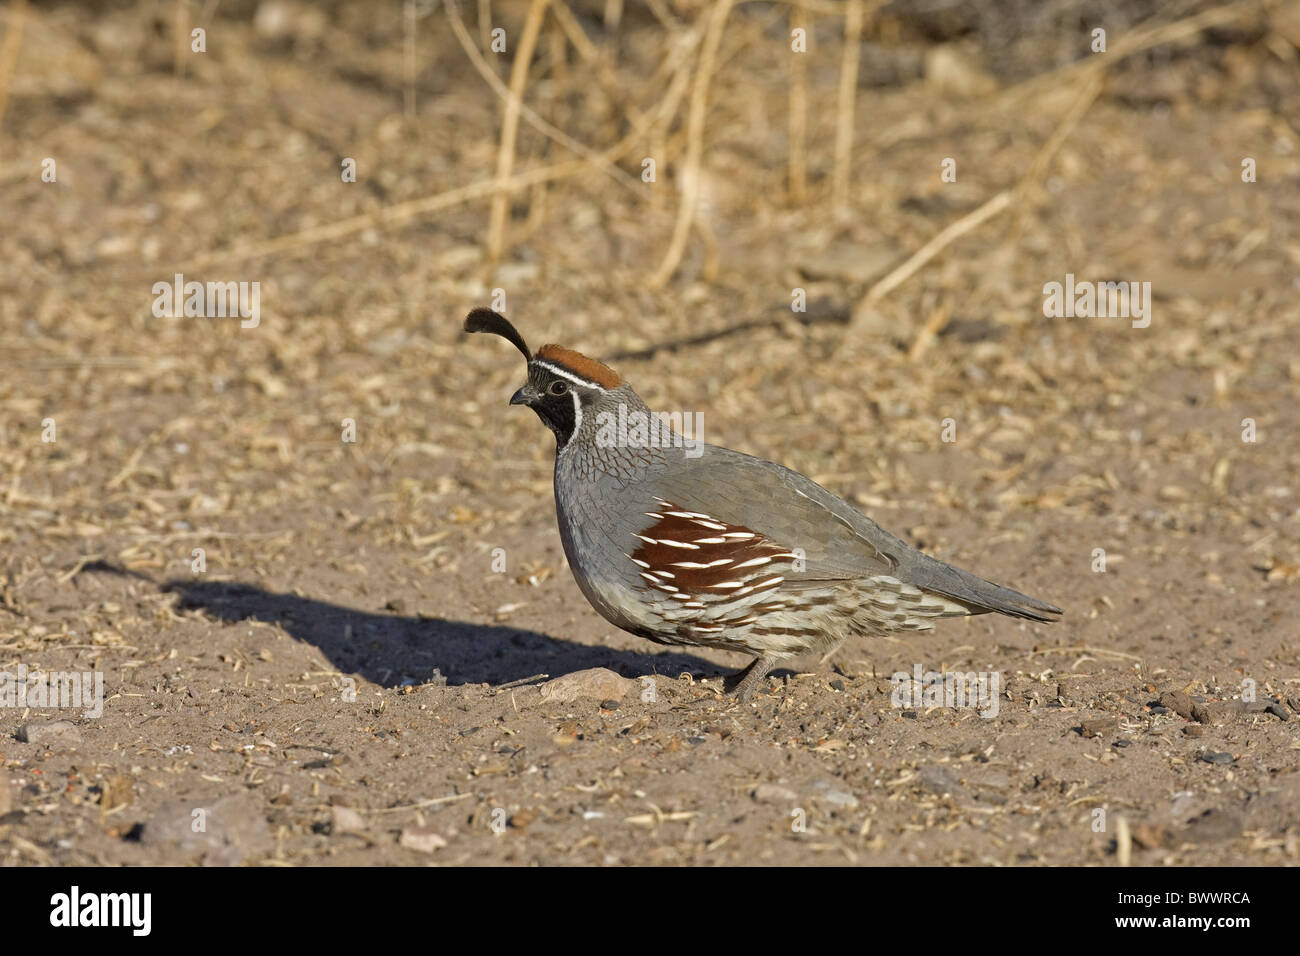 Gambel's Quail (Callipepla gambelii) adult male, standing on ground, Bosque del Apache, New Mexico, U.S.A. Stock Photo